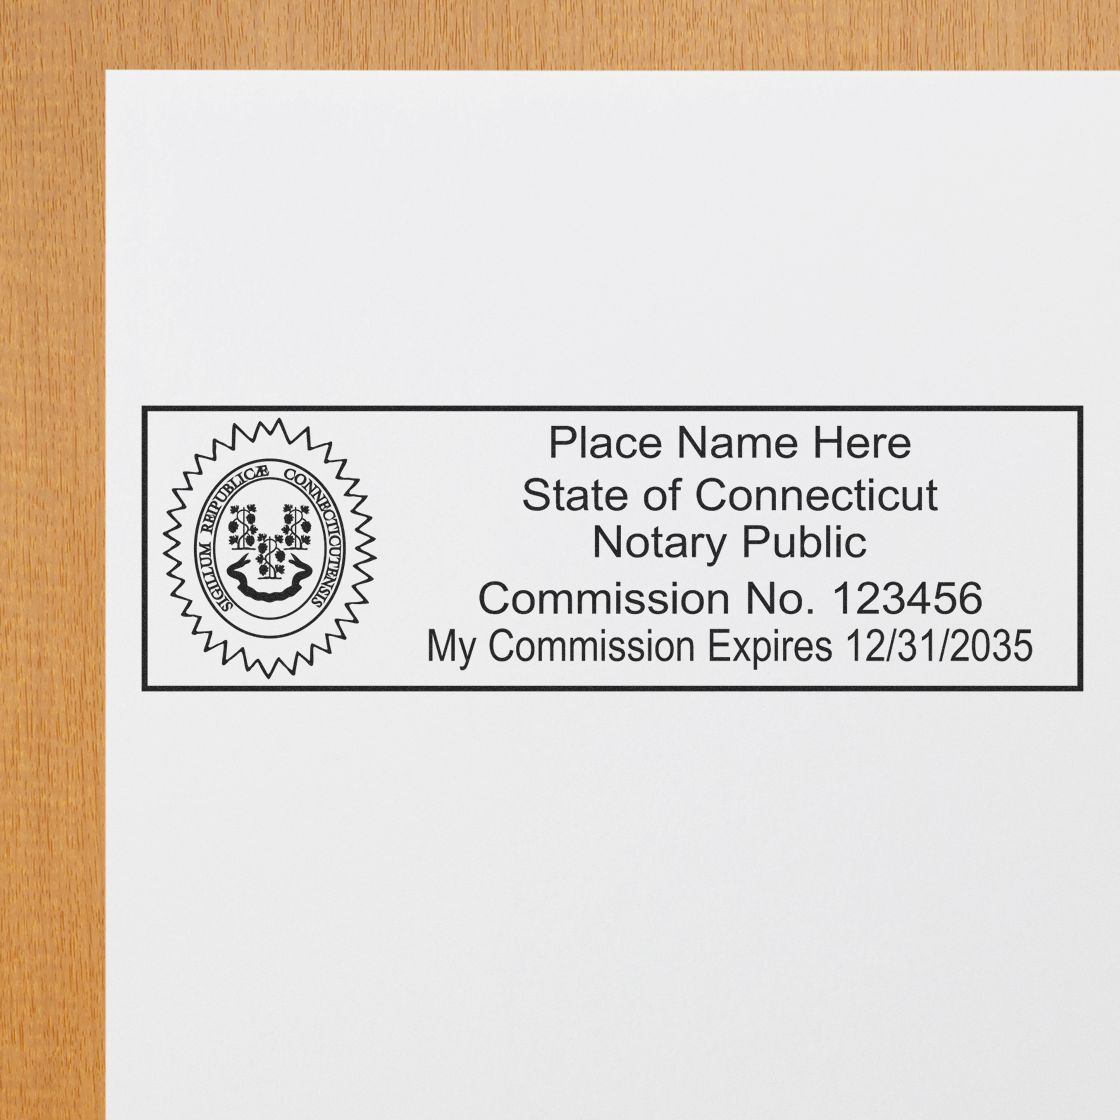 Another Example of a stamped impression of the Heavy-Duty Connecticut Rectangular Notary Stamp on a piece of office paper.